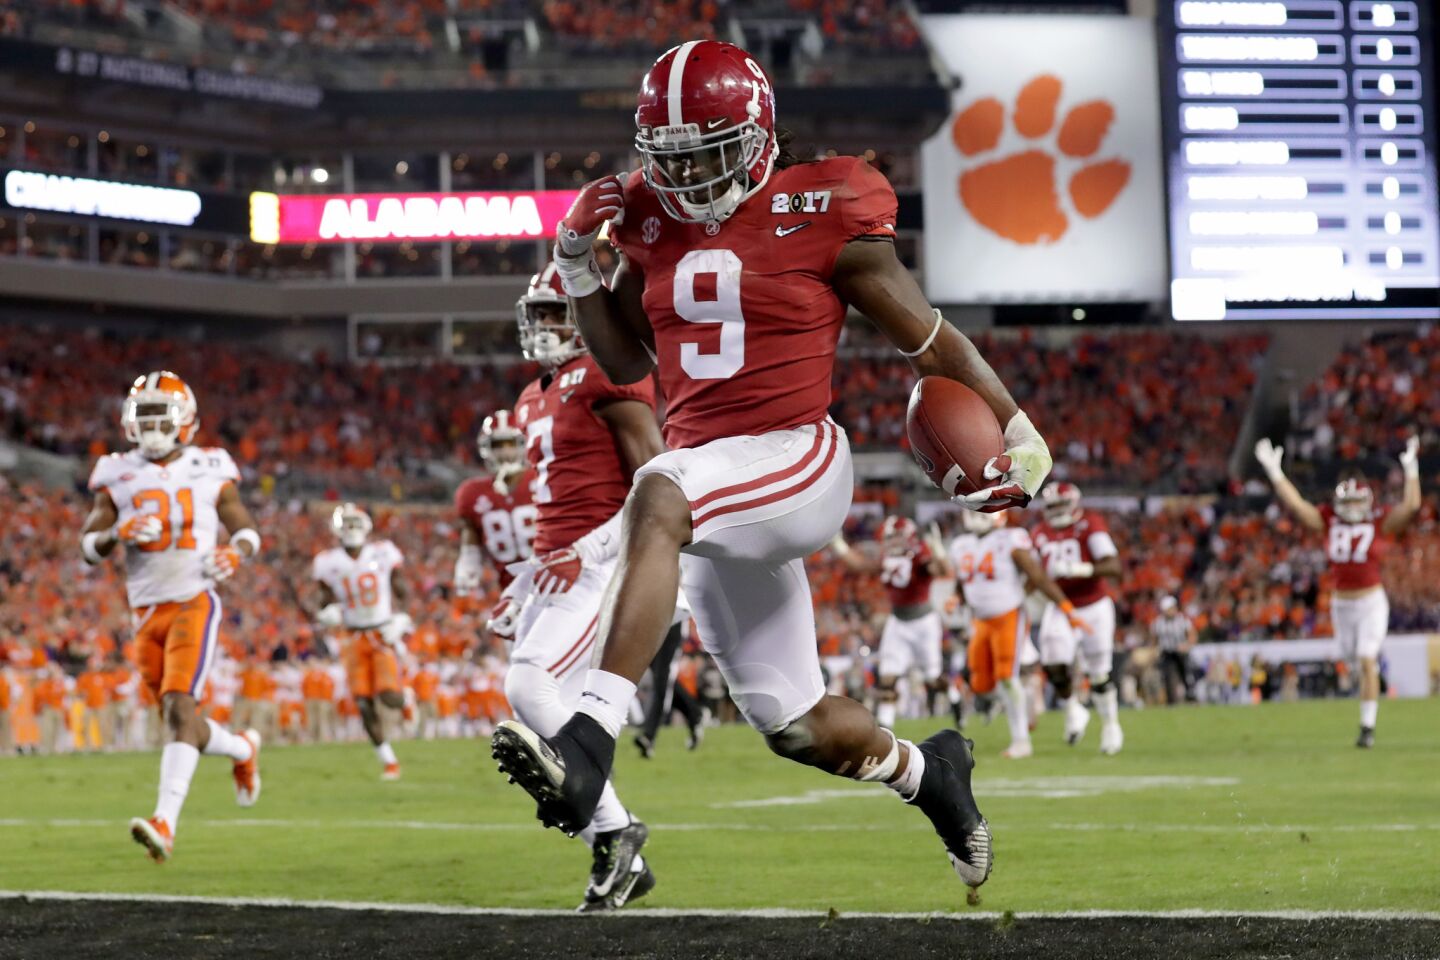 Alabama running back Bo Scarbrough crosses the goal line for a 37-yard touchdown run against Clemson during the second quarter.